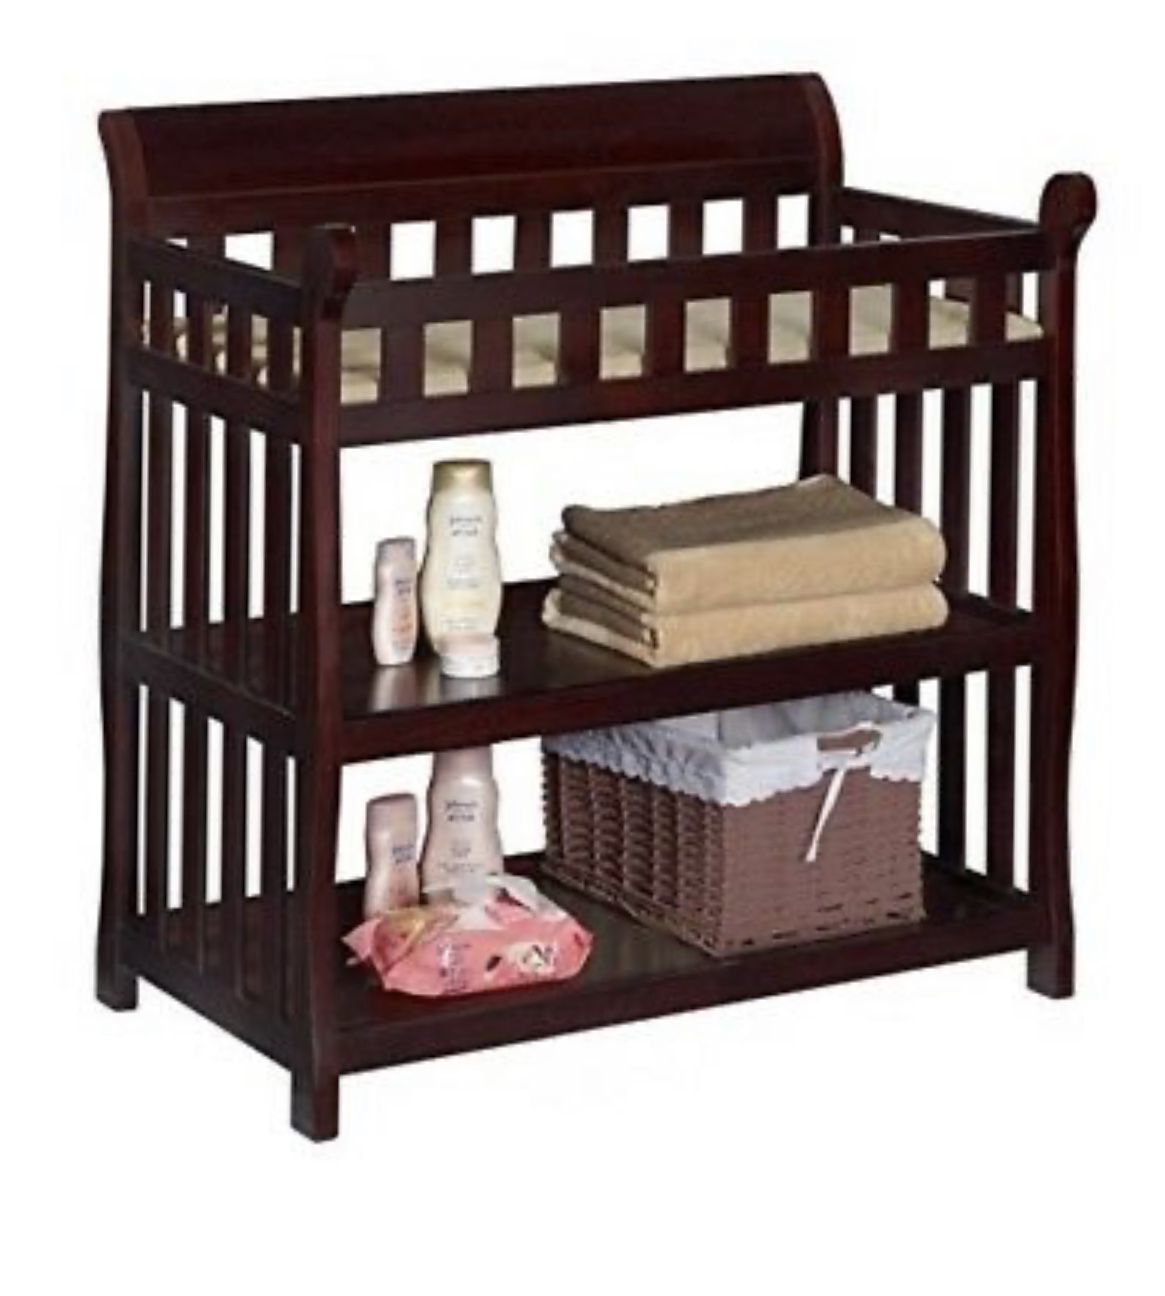 Babies R Us Cherry Wood Changing Table